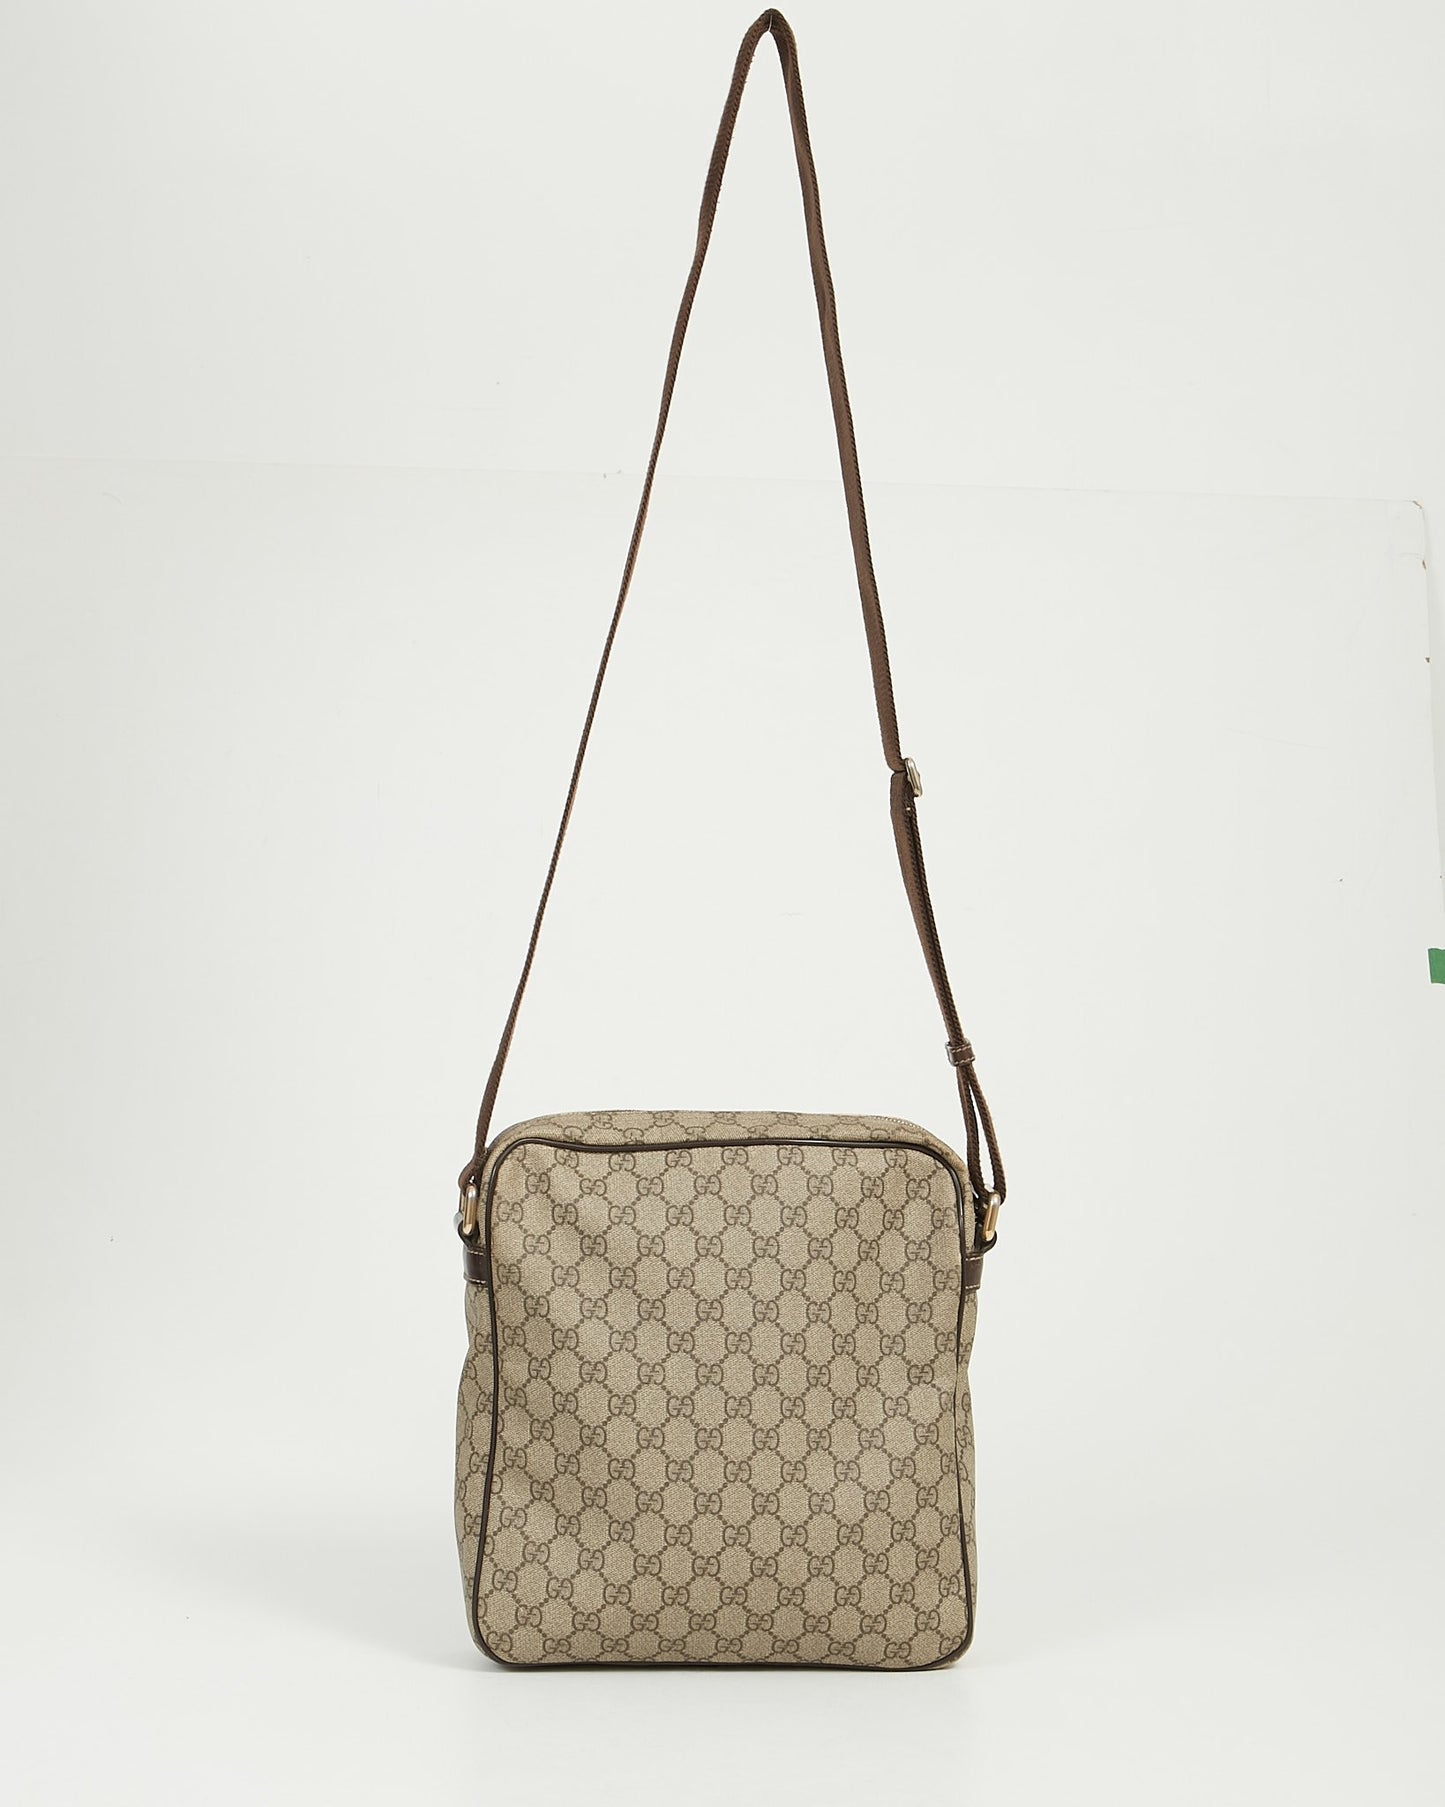 Gucci Brown GG Supreme Coated Canvas Crossbody Bag